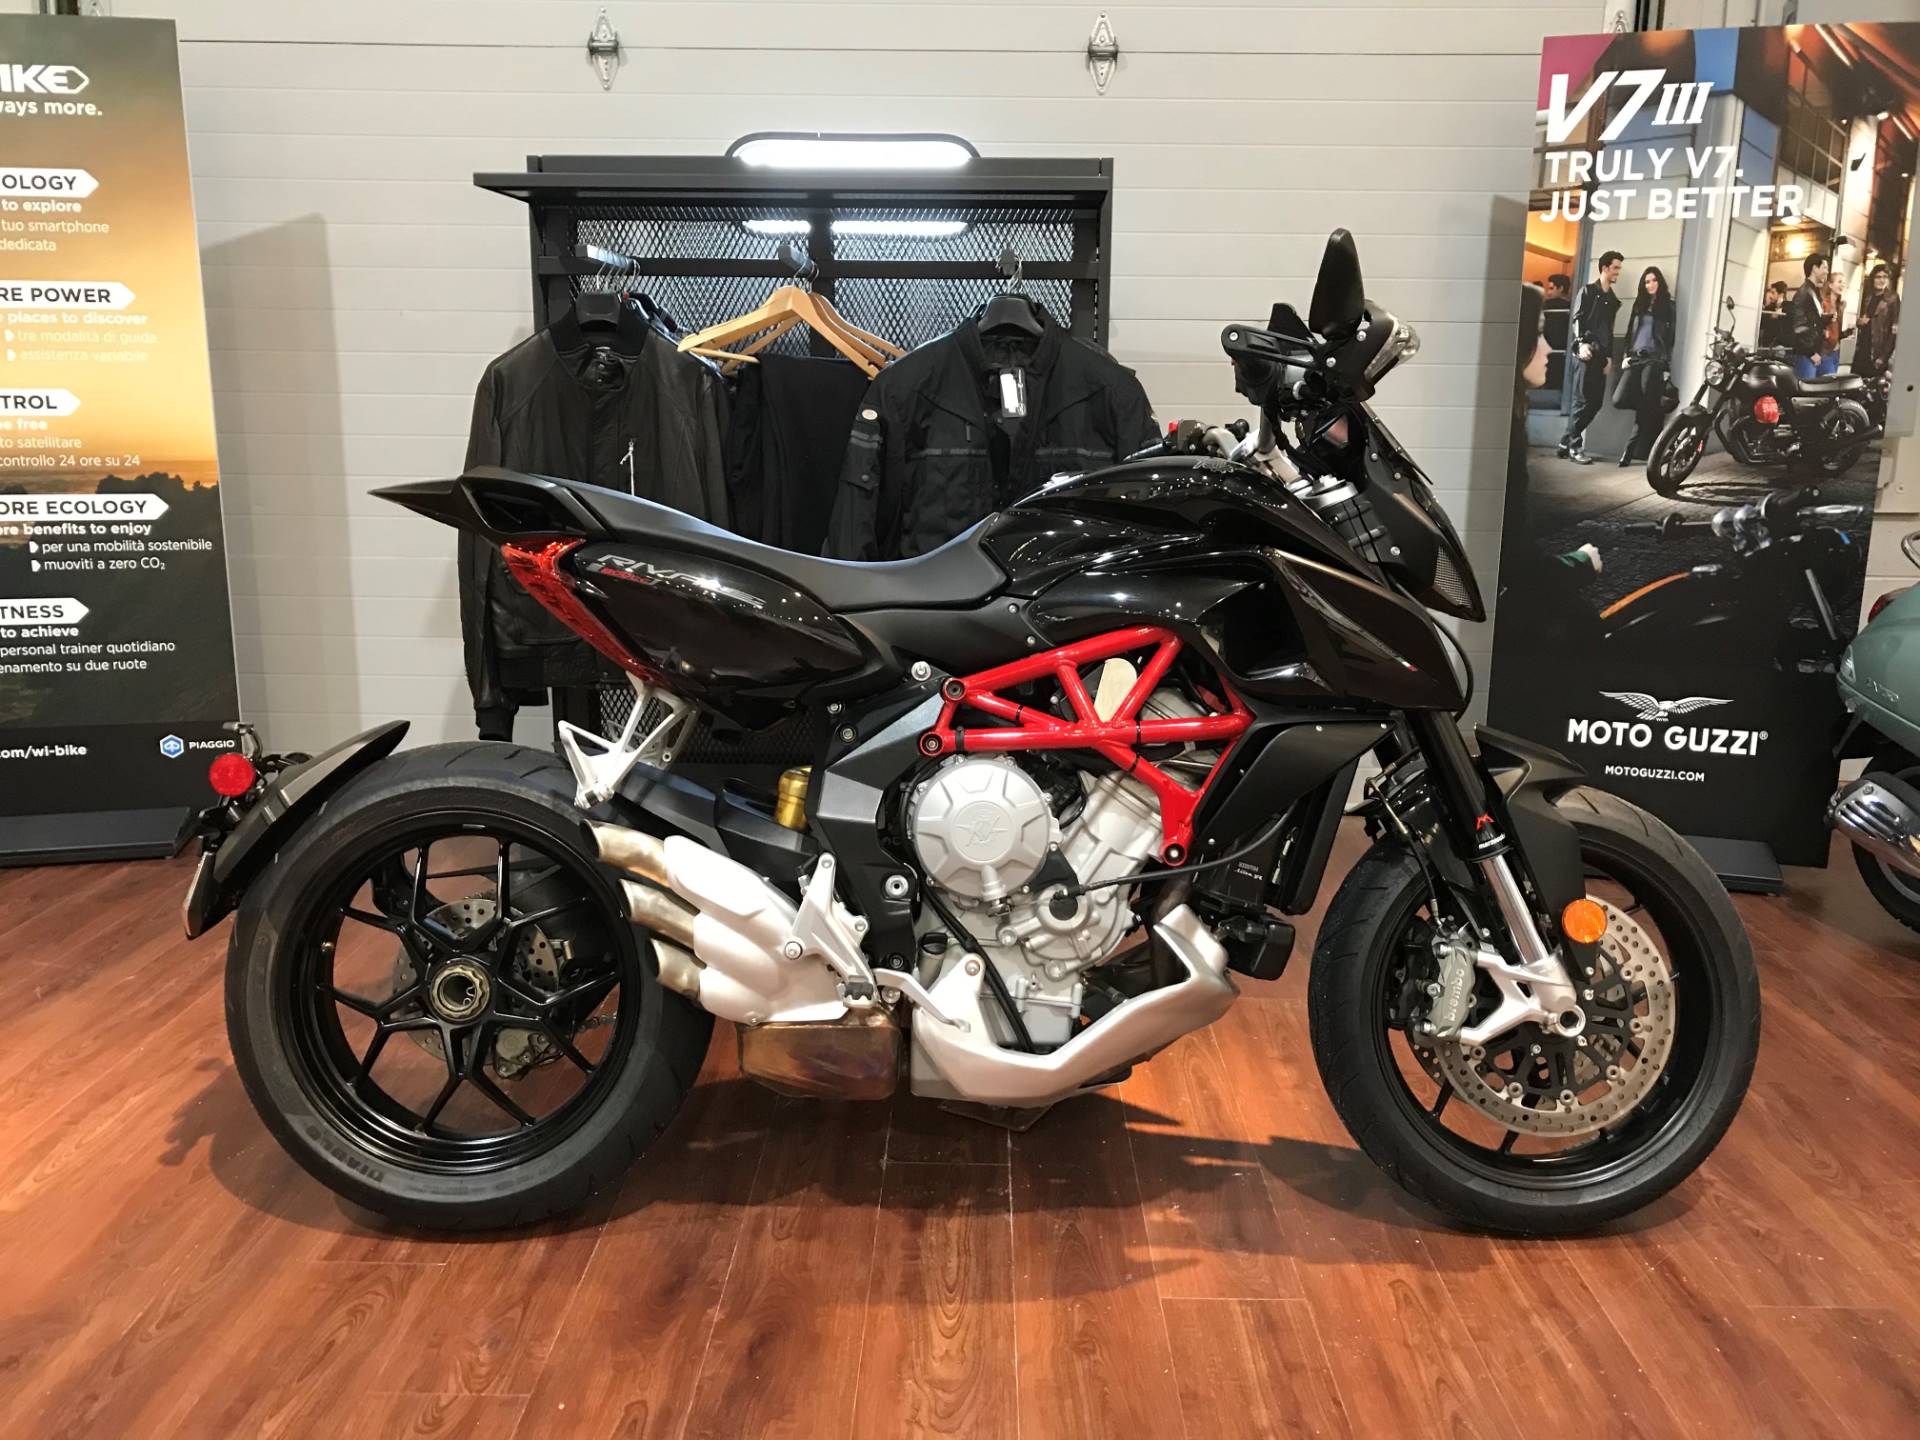 Used 2014 MV Agusta Rivale 800 EAS Motorcycles in West Chester, PA ...